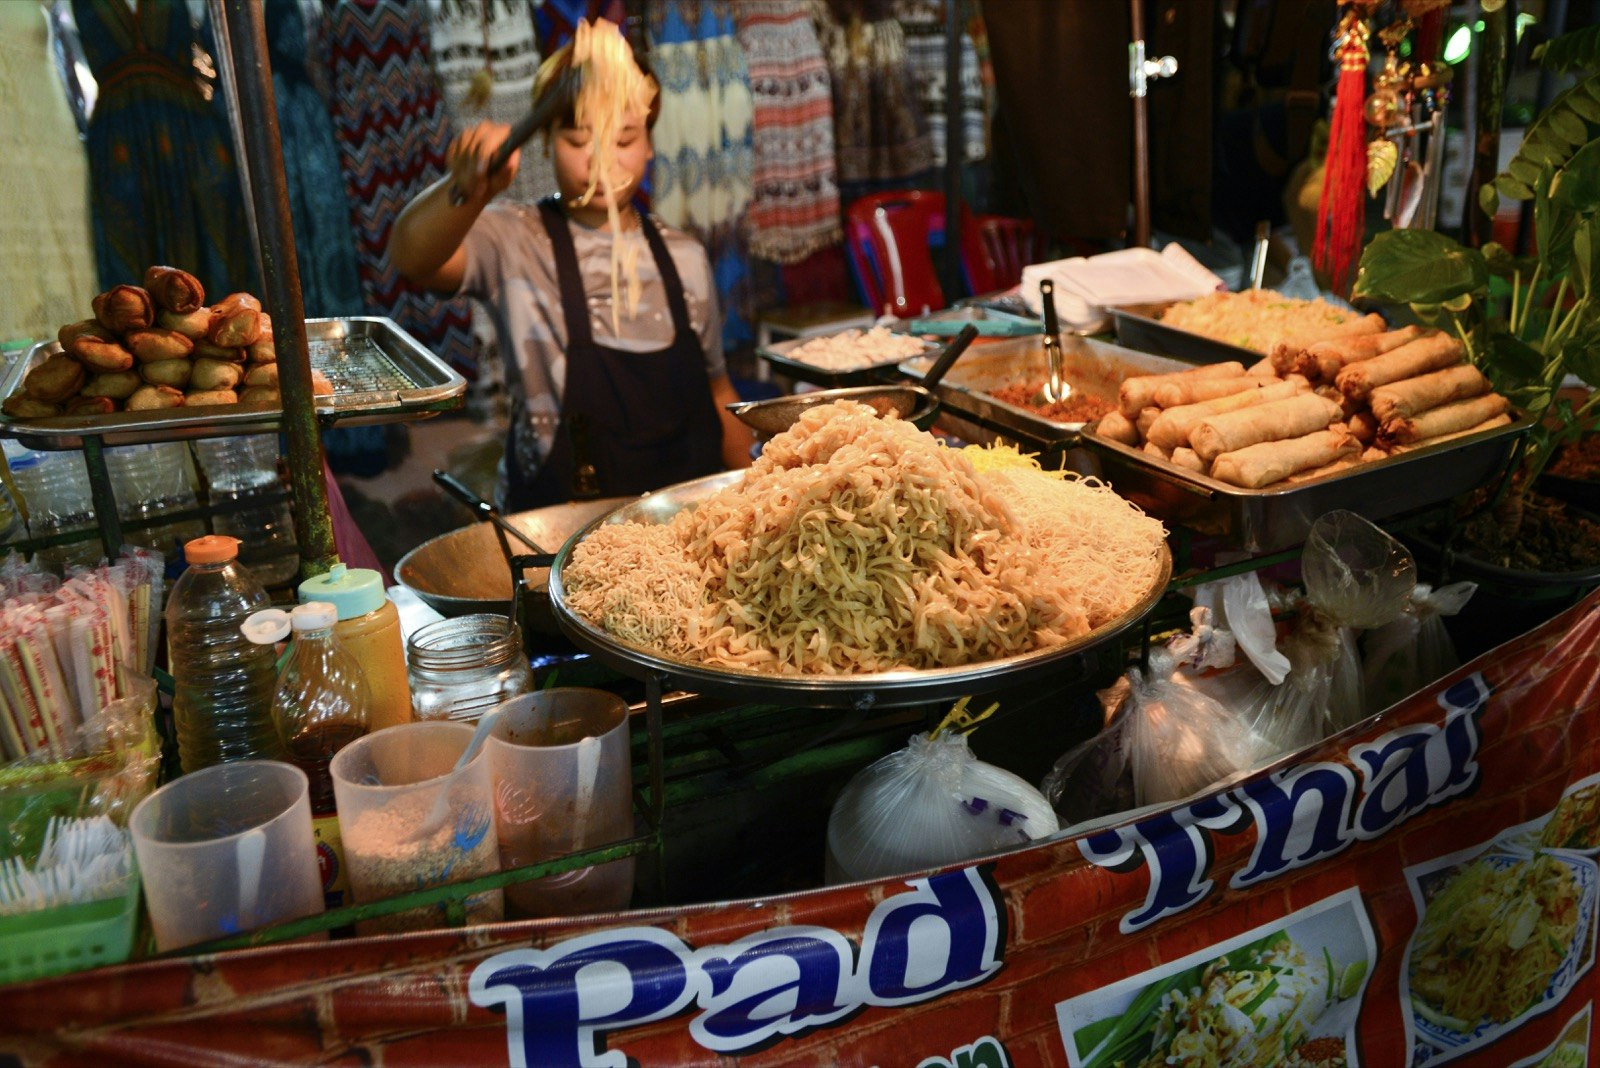 Woman stands behind a street food stand with a large wok filled with Pad Thai